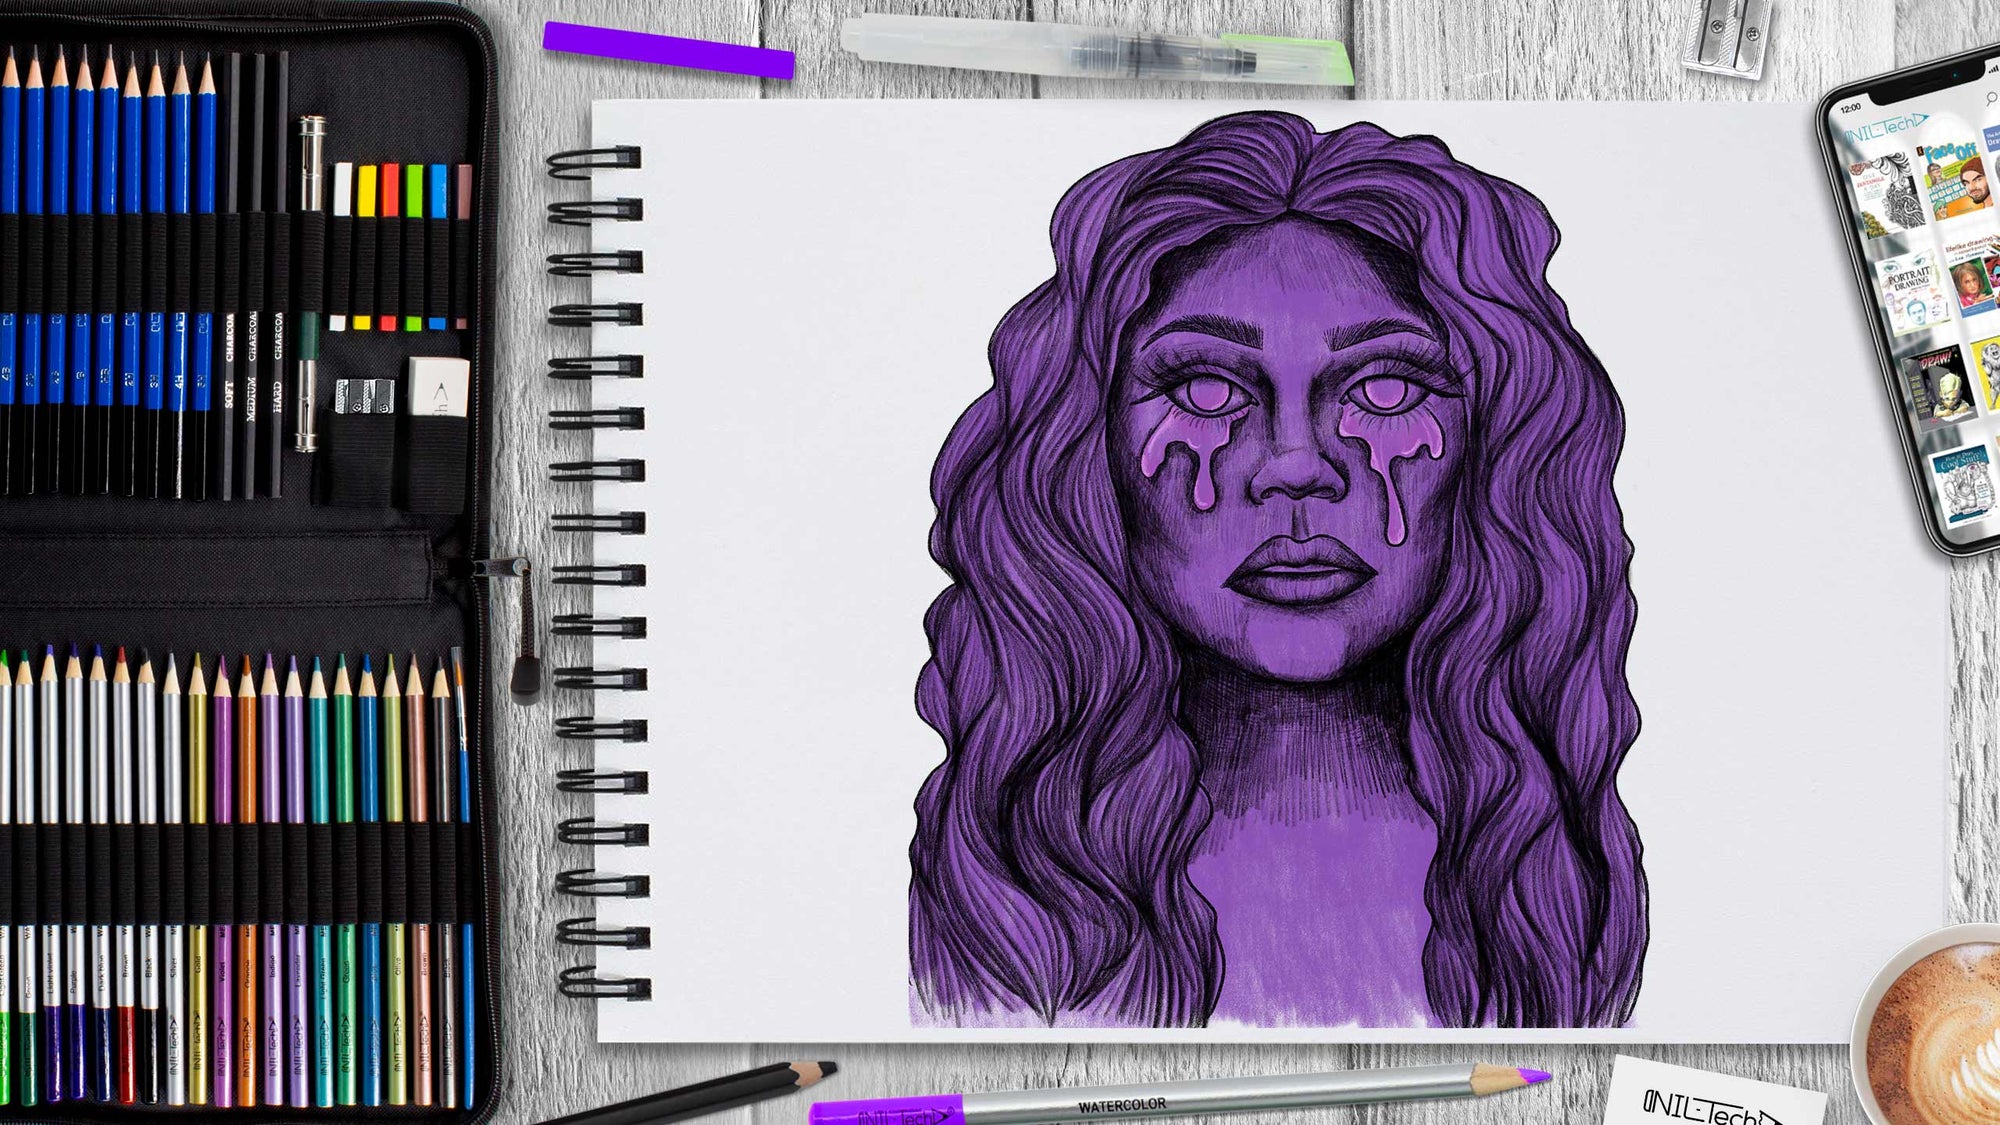 ANIME with Posca Markers on NIL Black Sketchpad: AMAZING! [Video] [Video]